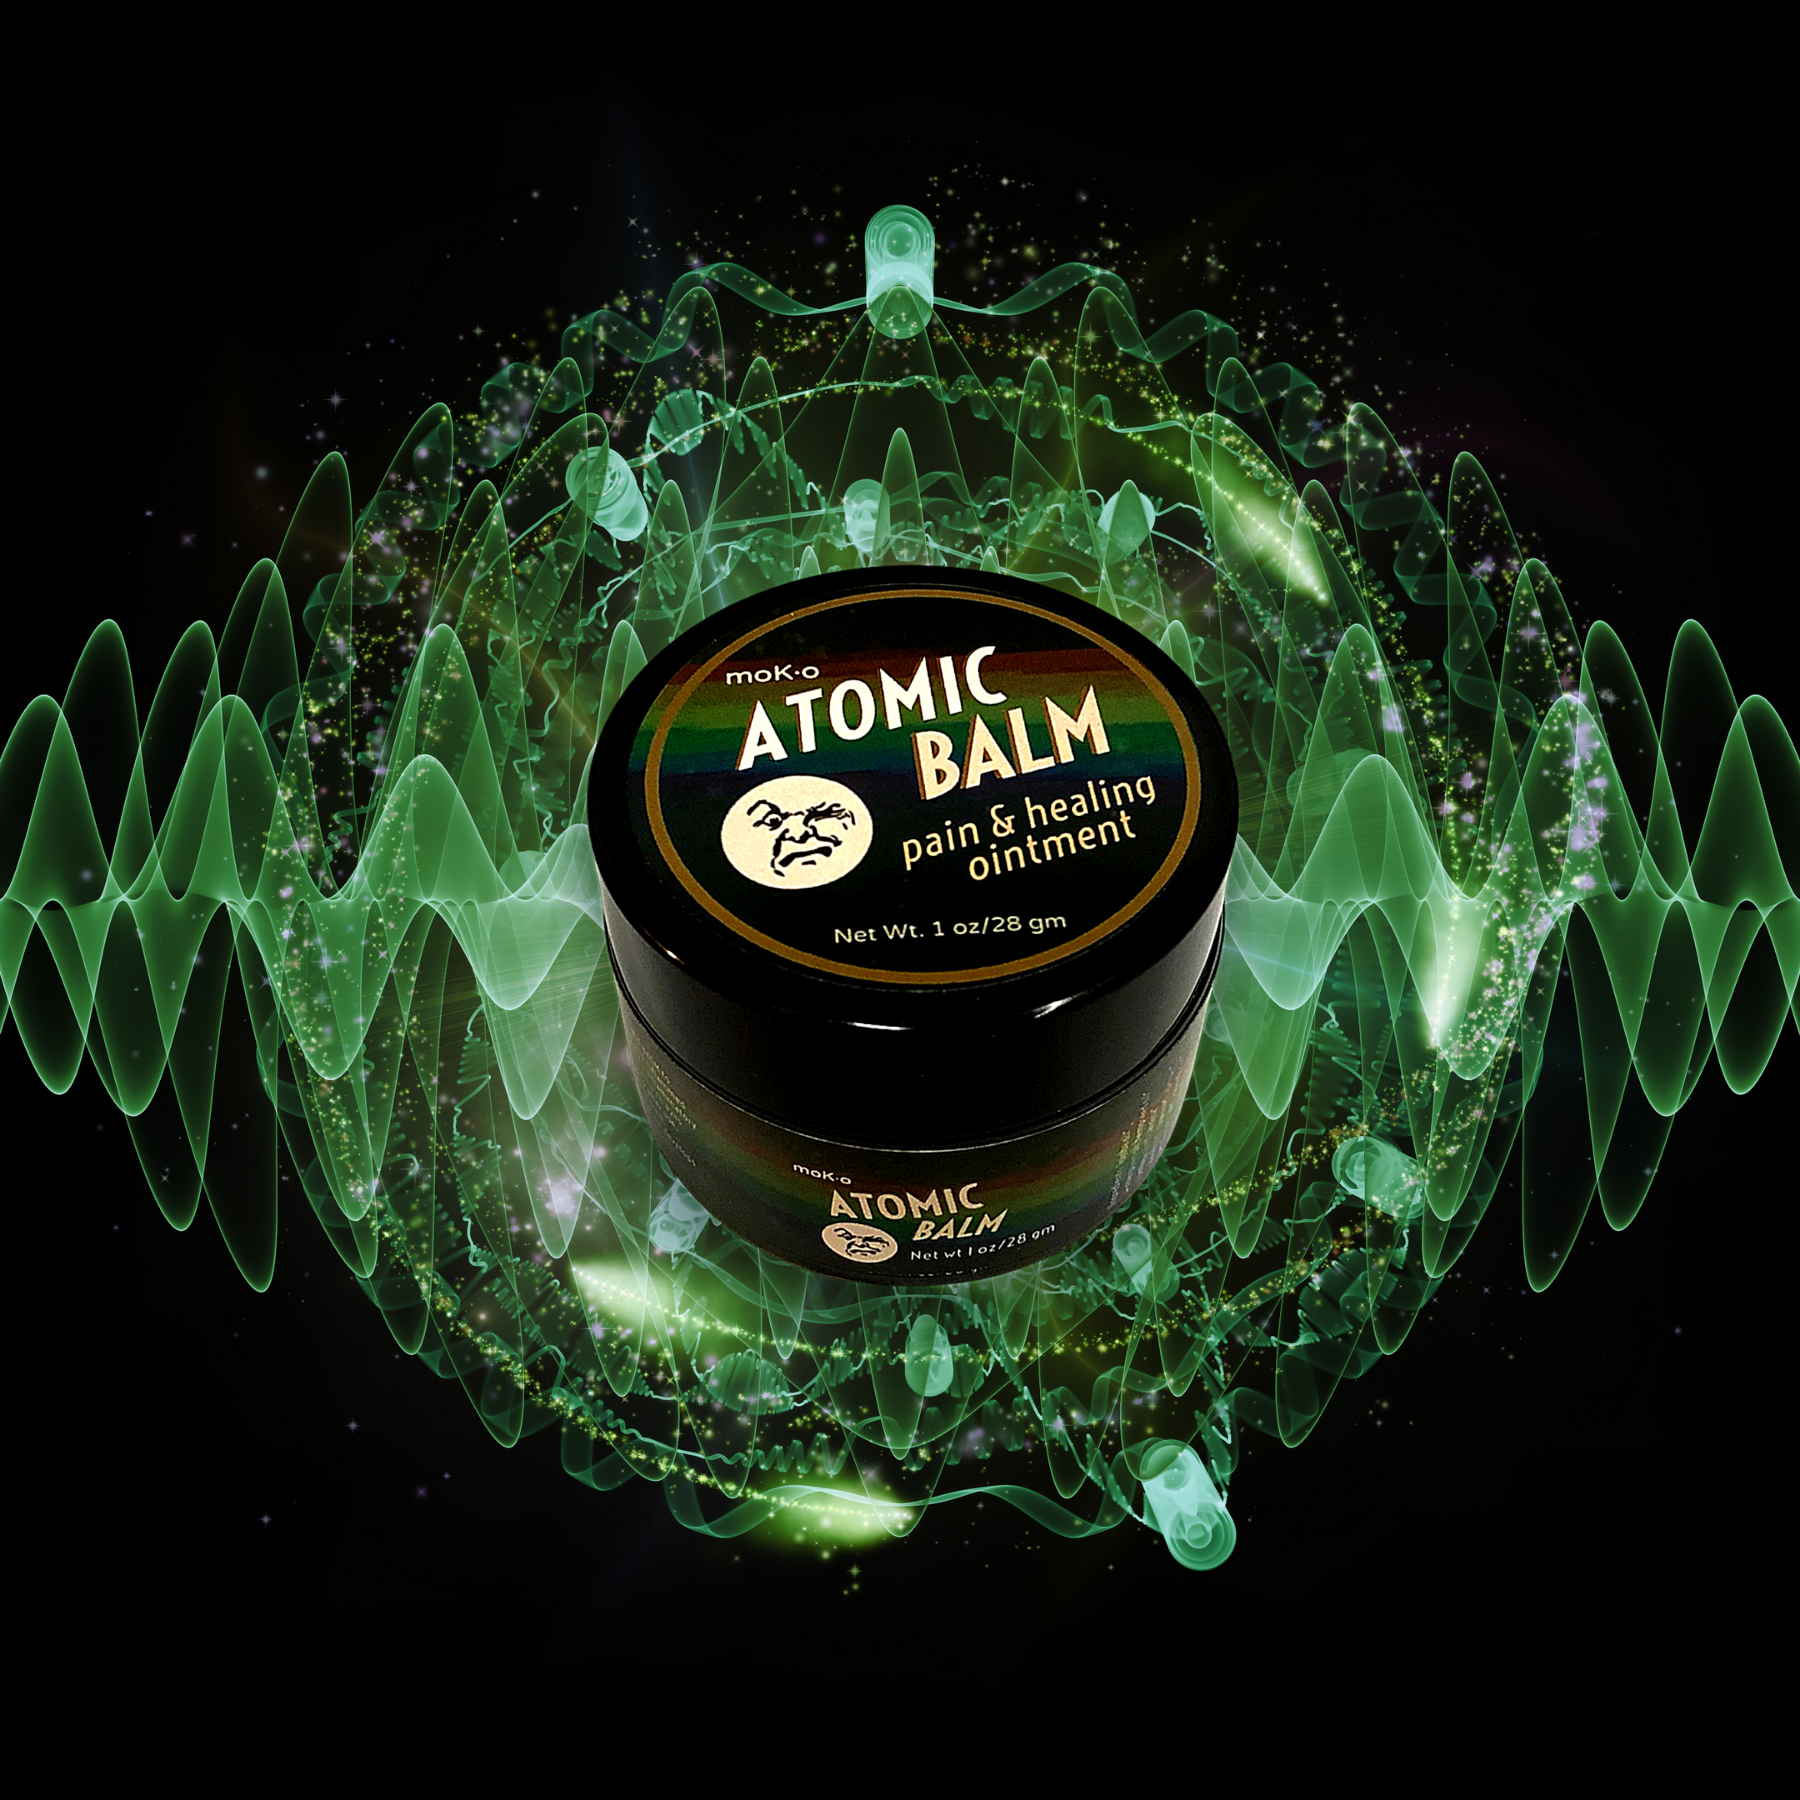 Make Atomic Balm one of your Atomic Habits. Get used to feeling like yourself again by using the powerful and effective OTC pain relieving creamy balm. 